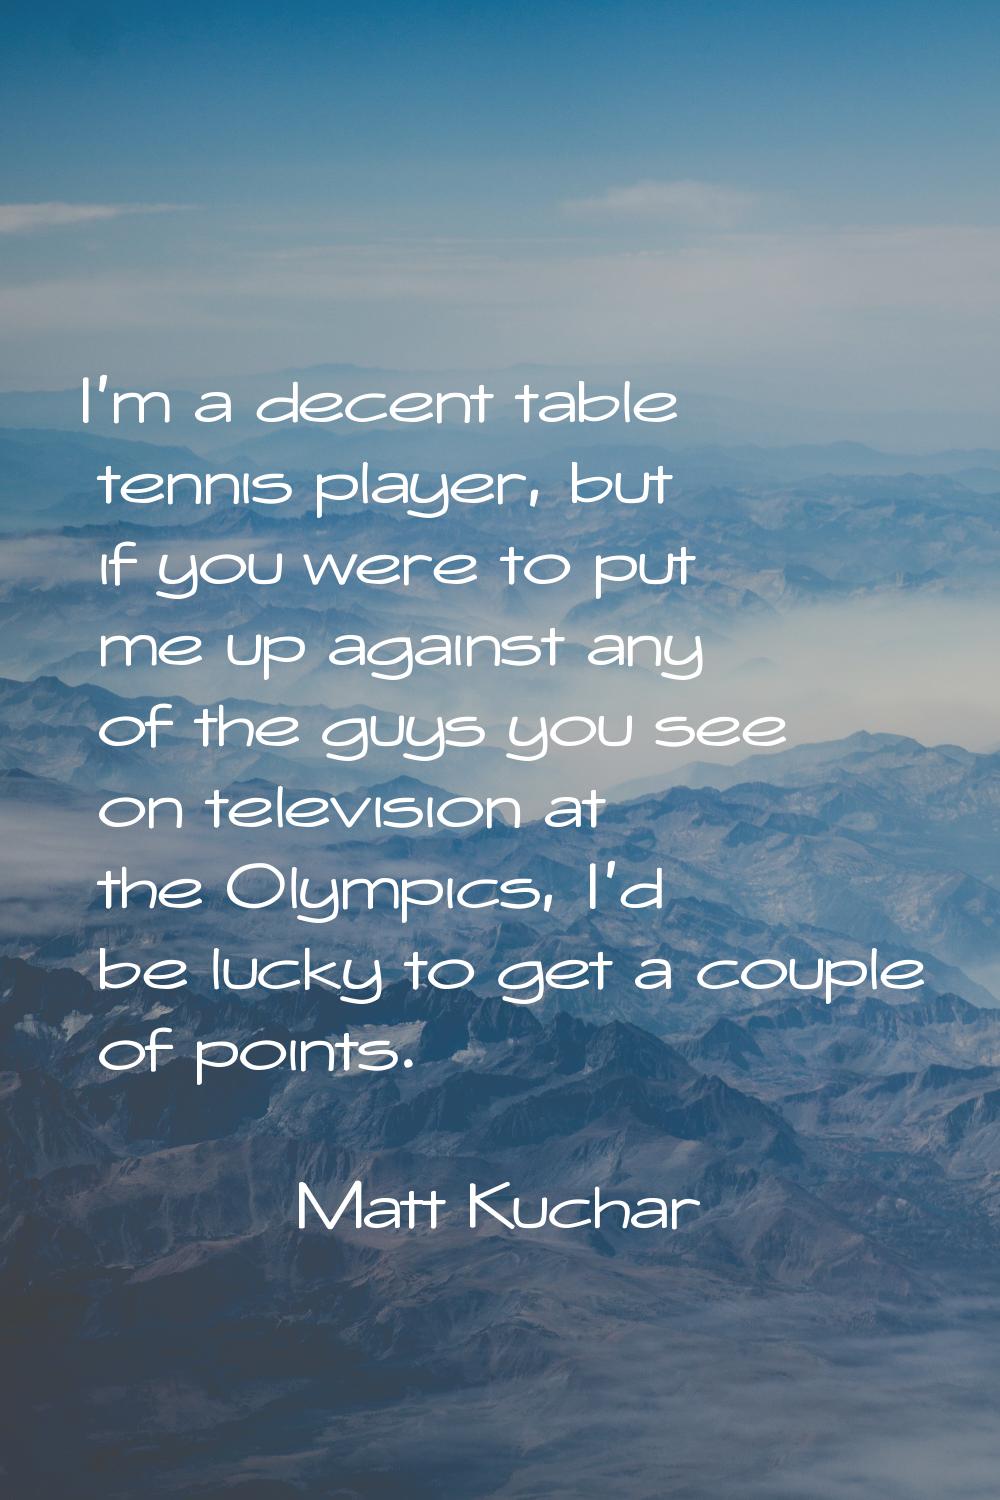 I'm a decent table tennis player, but if you were to put me up against any of the guys you see on t